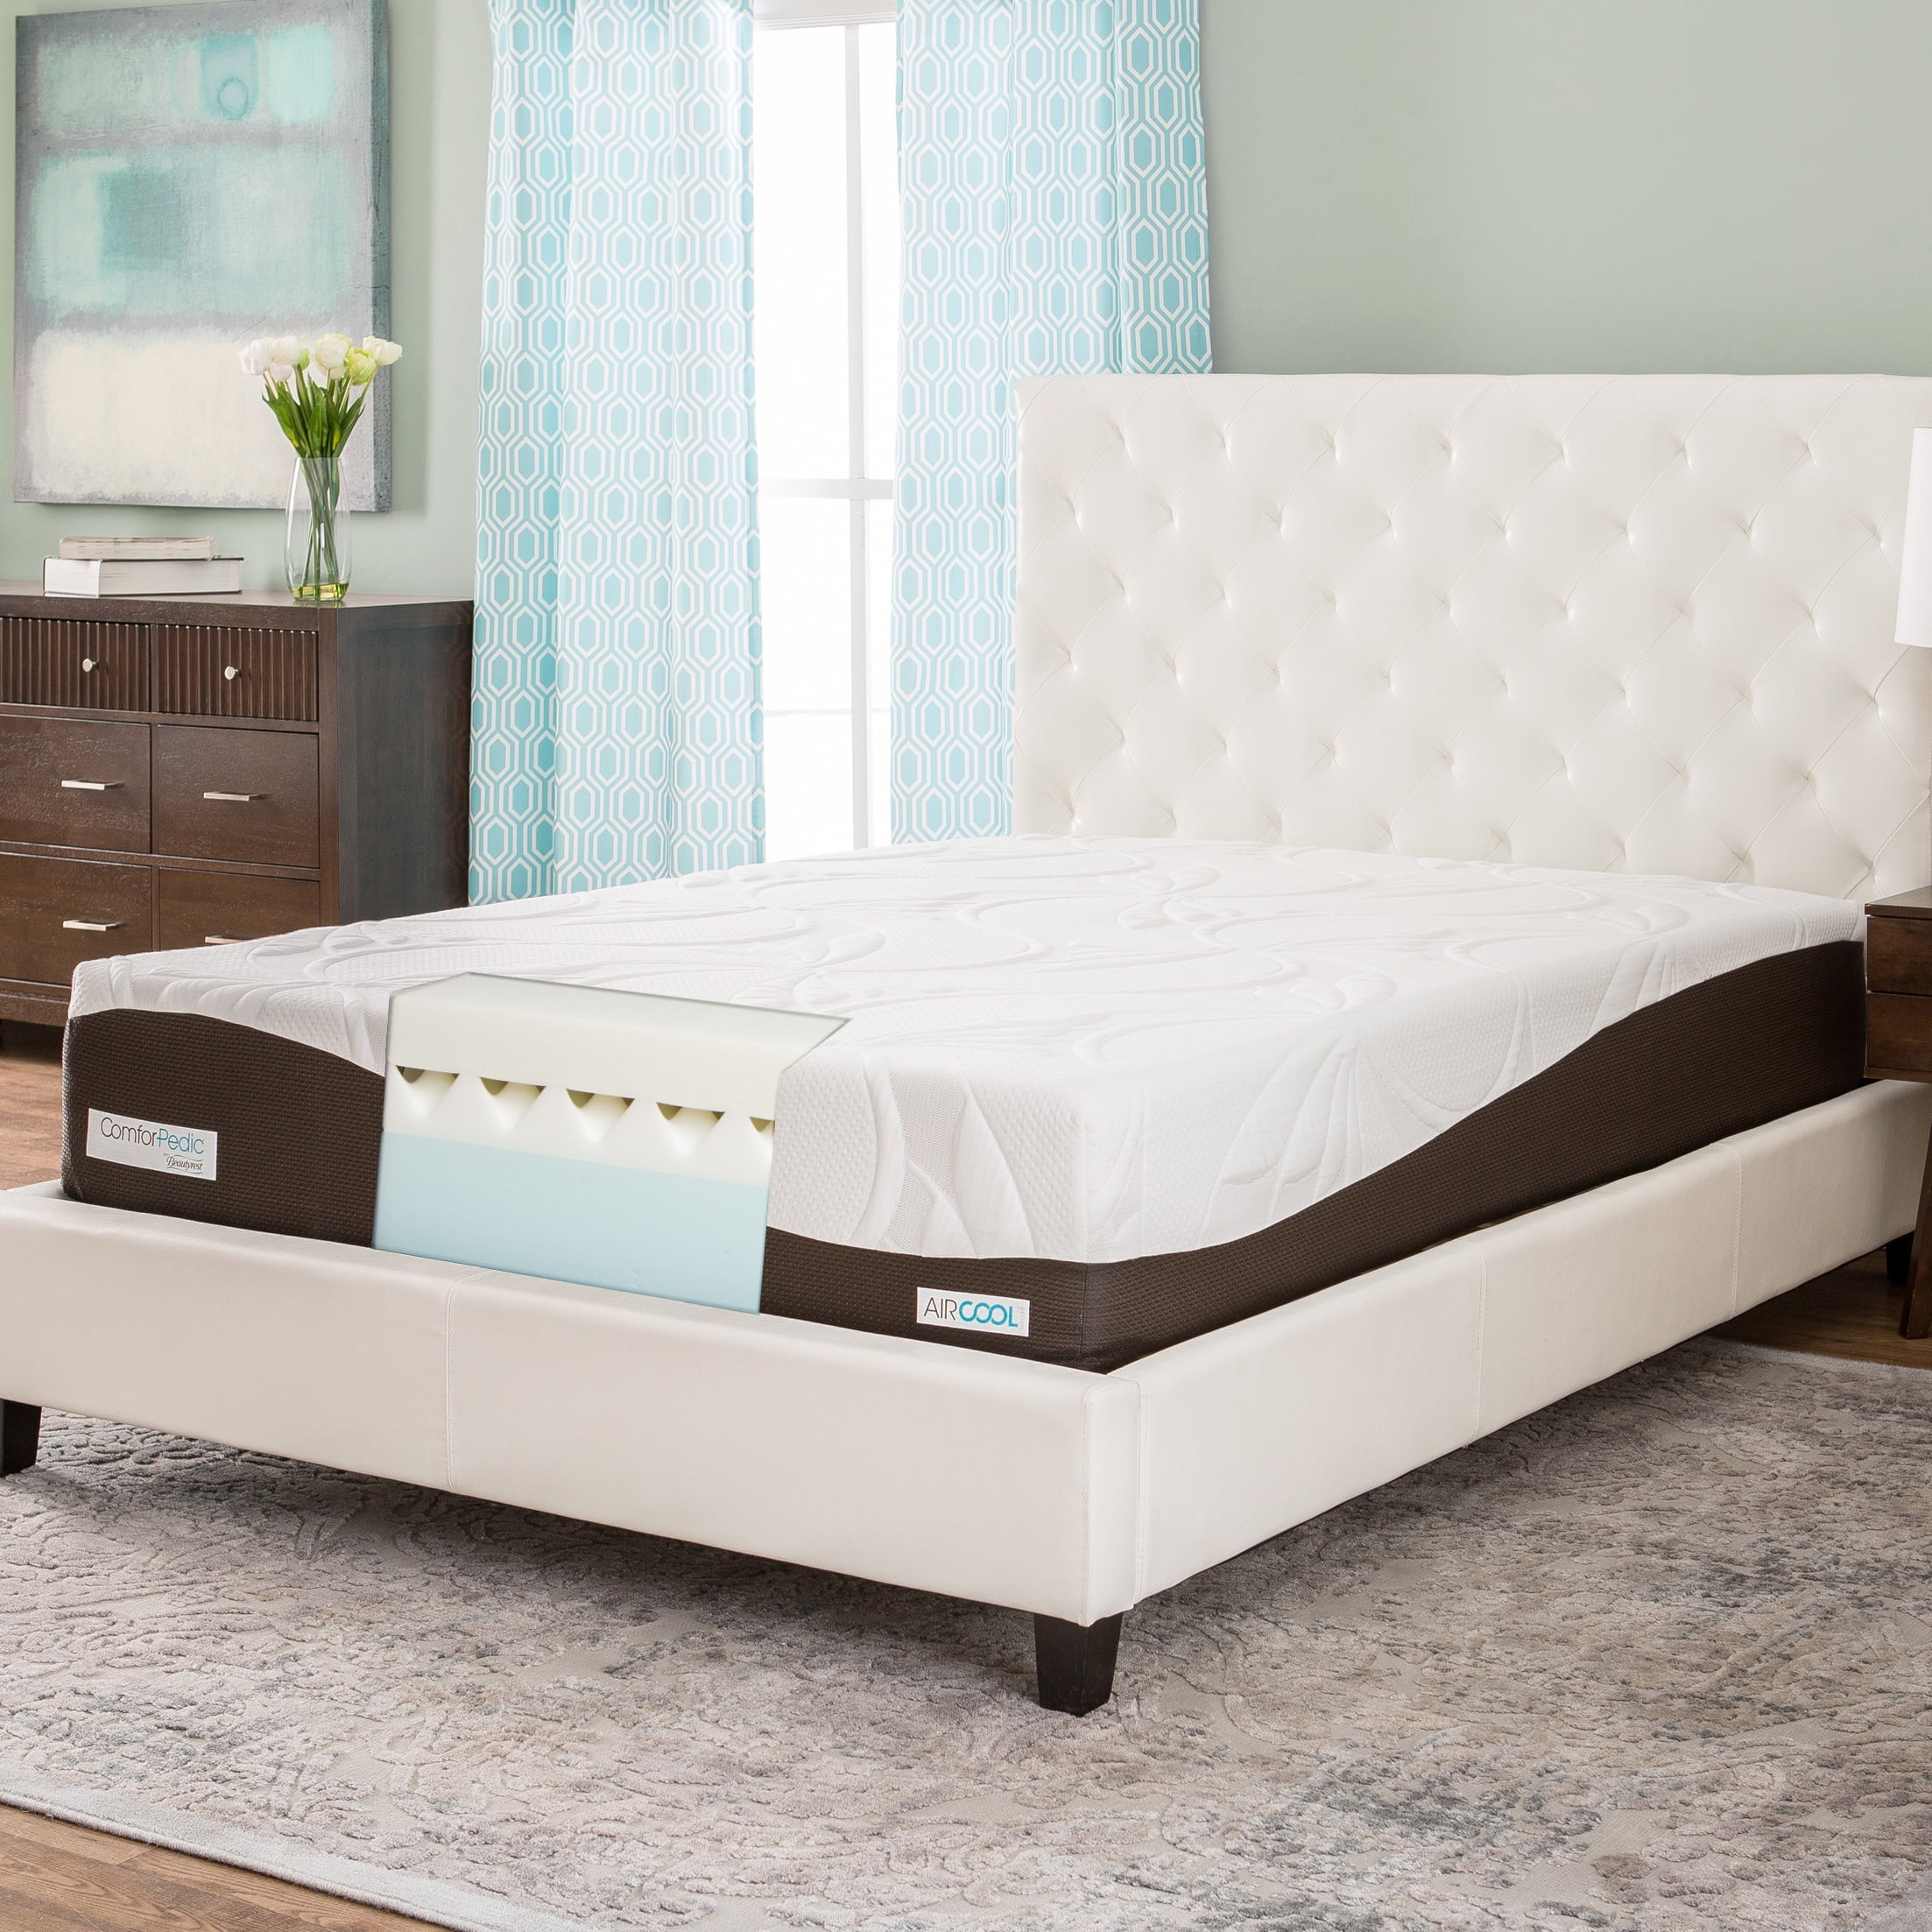 Simmons Beautyrest ComforPedic from Beautyrest 12-inch ...